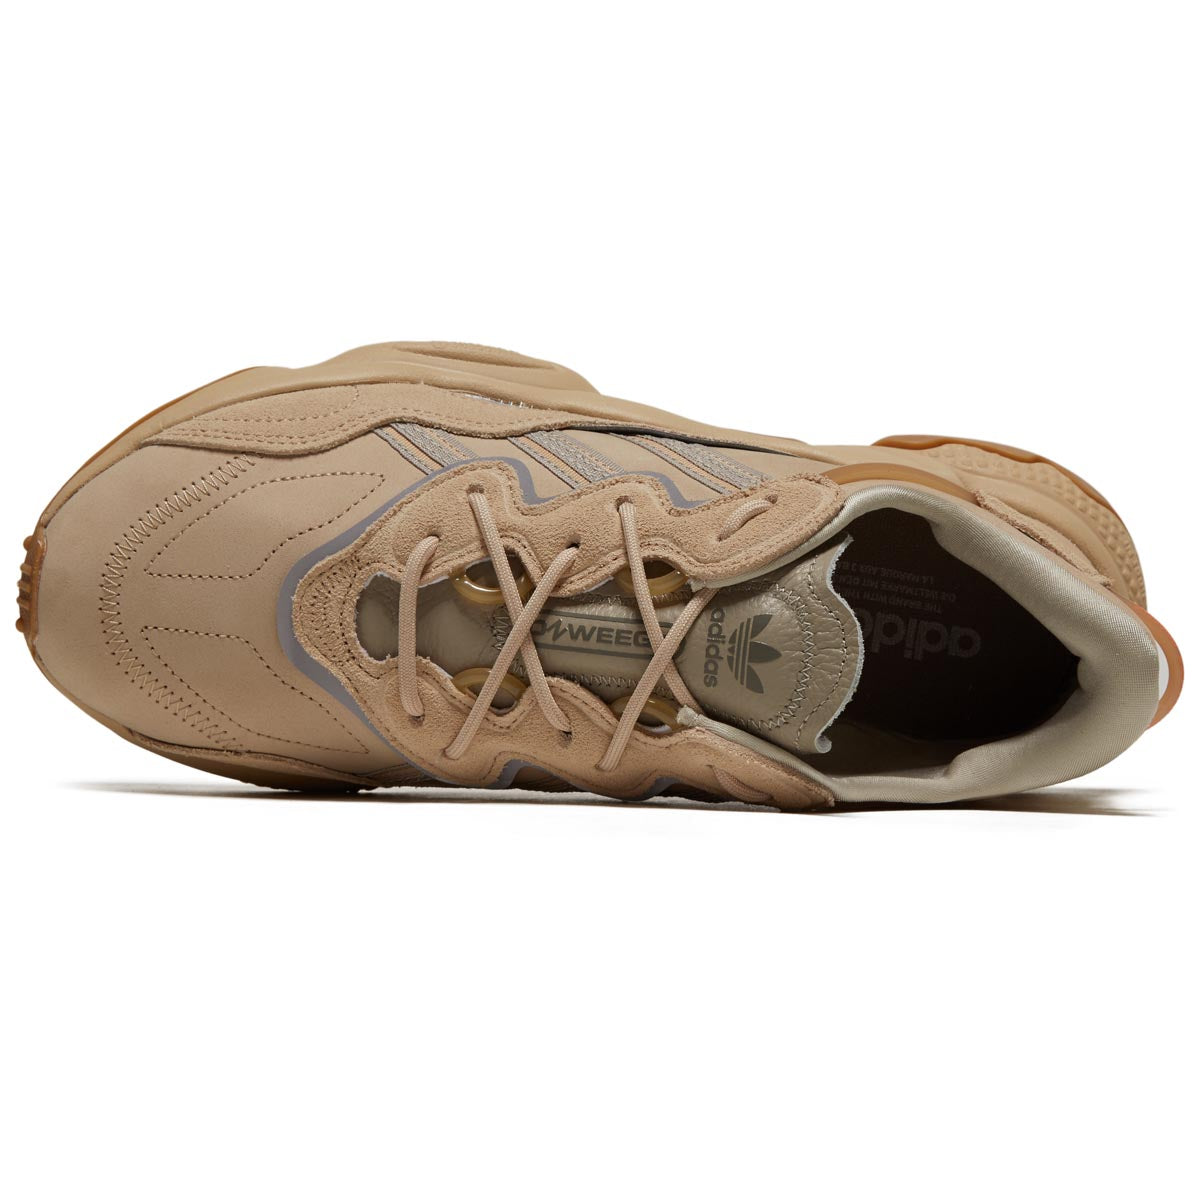 Adidas Ozweego Shoes - St Pale Nude/Light Brown/Solar Red image 3